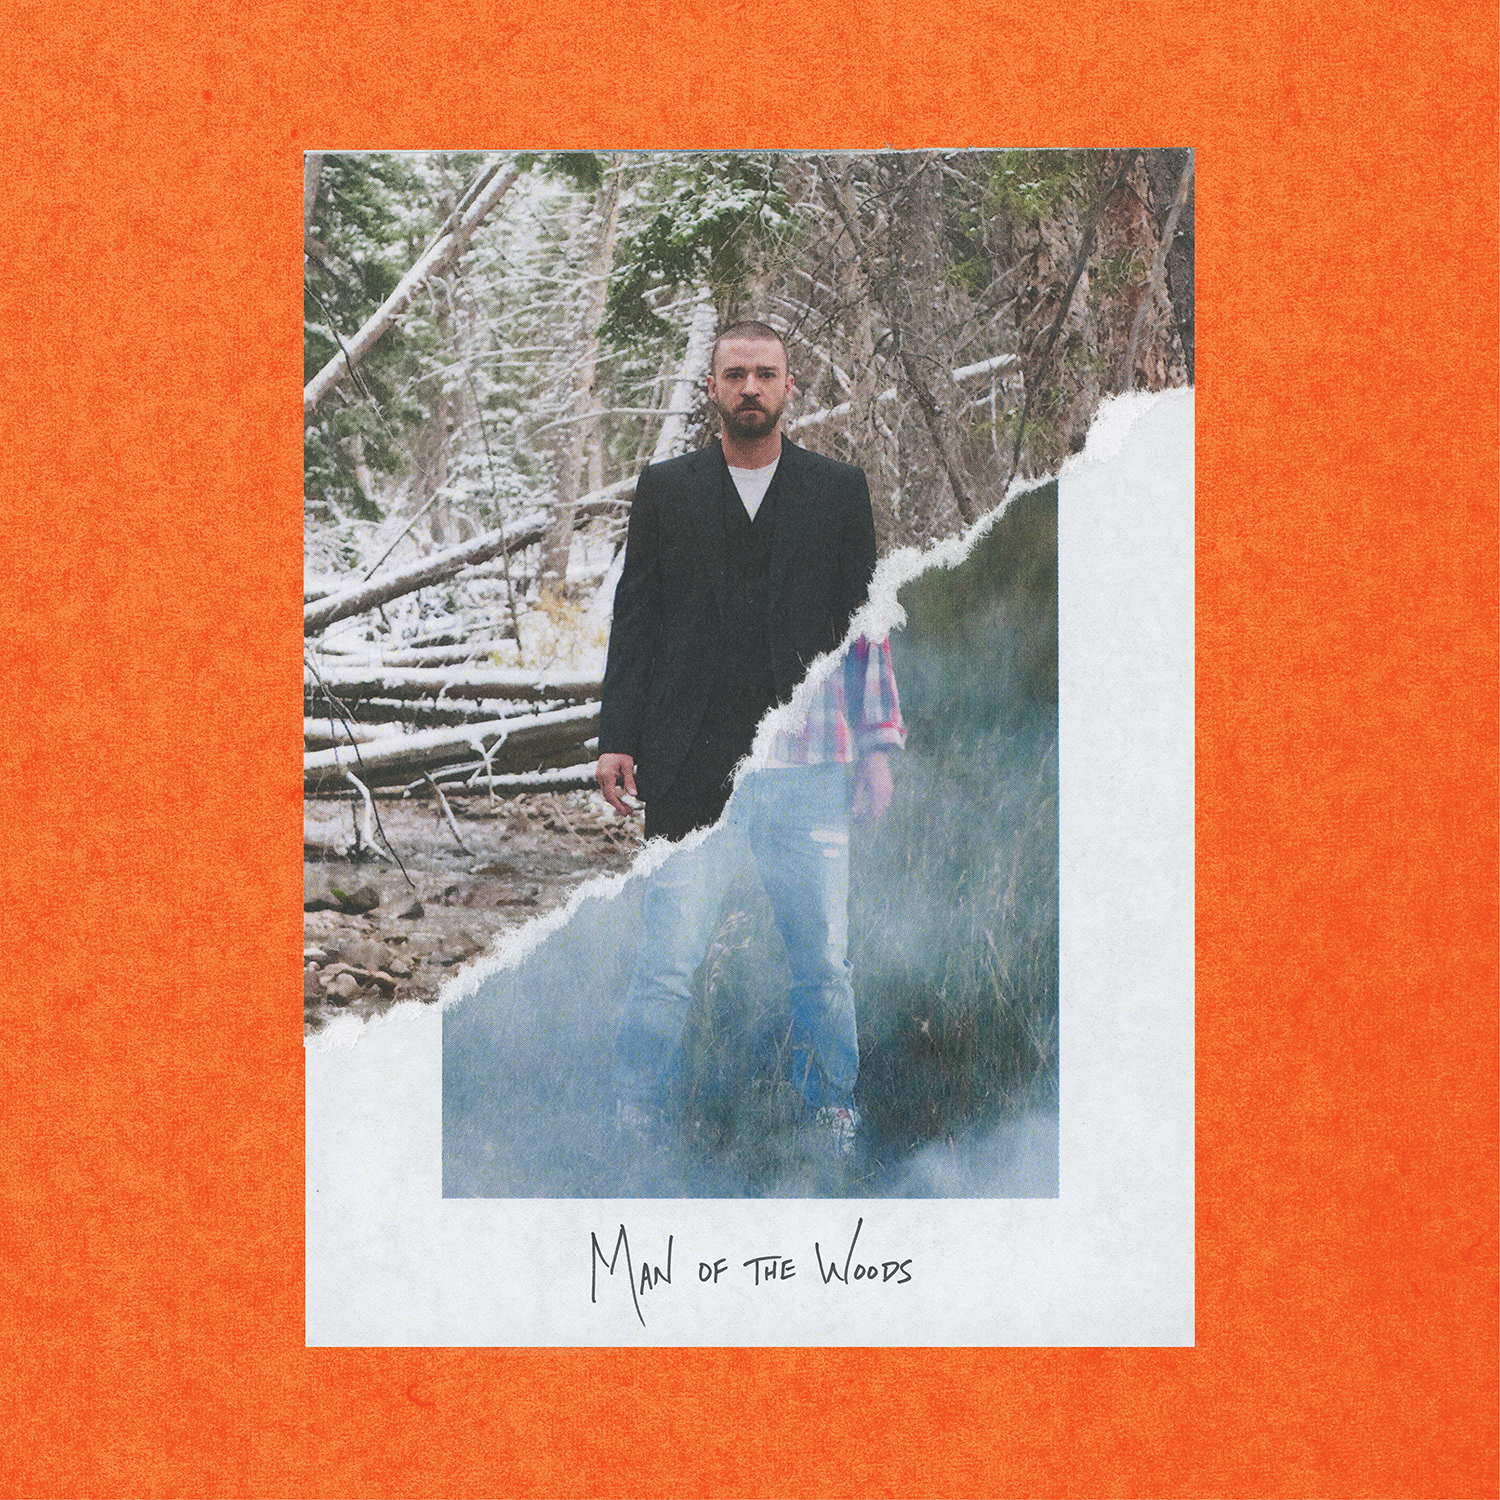 Justin Timberlake – Man Of The Woods
Released: February 2, 2018 
Label: RCA Records
